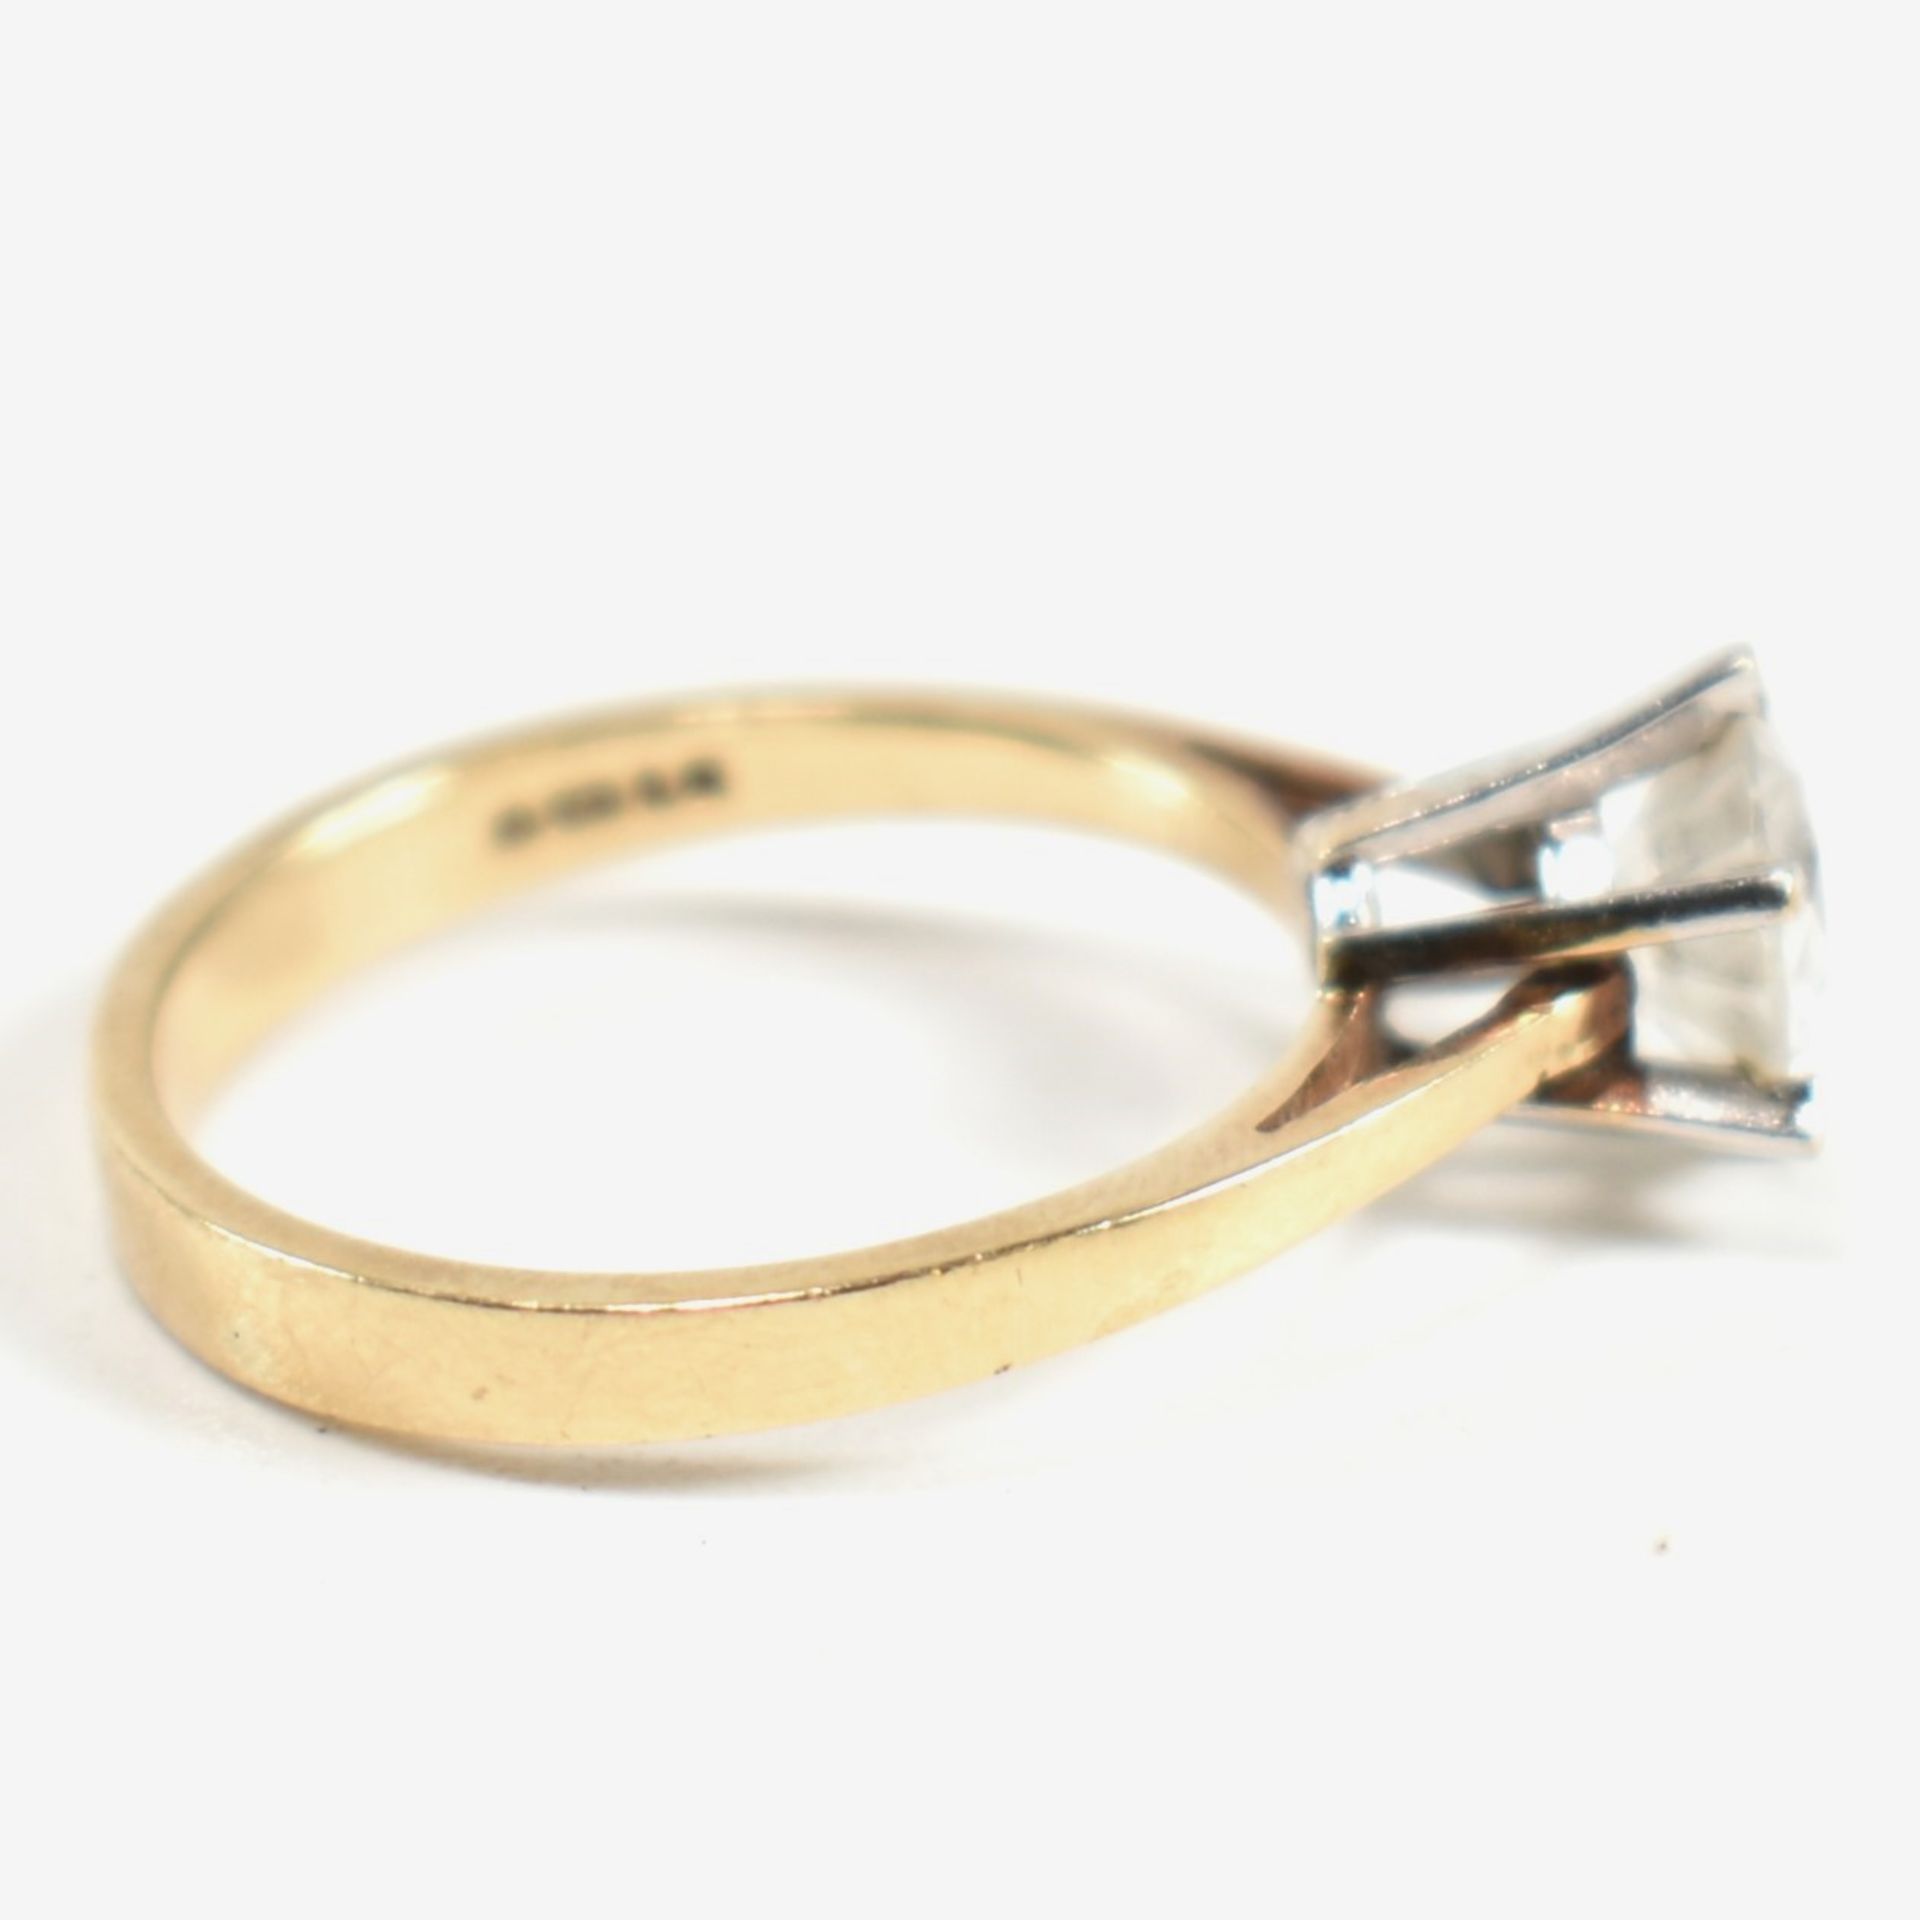 HALLMARKED 9CT GOLD & CZ SOLITAIRE RING - Image 4 of 8